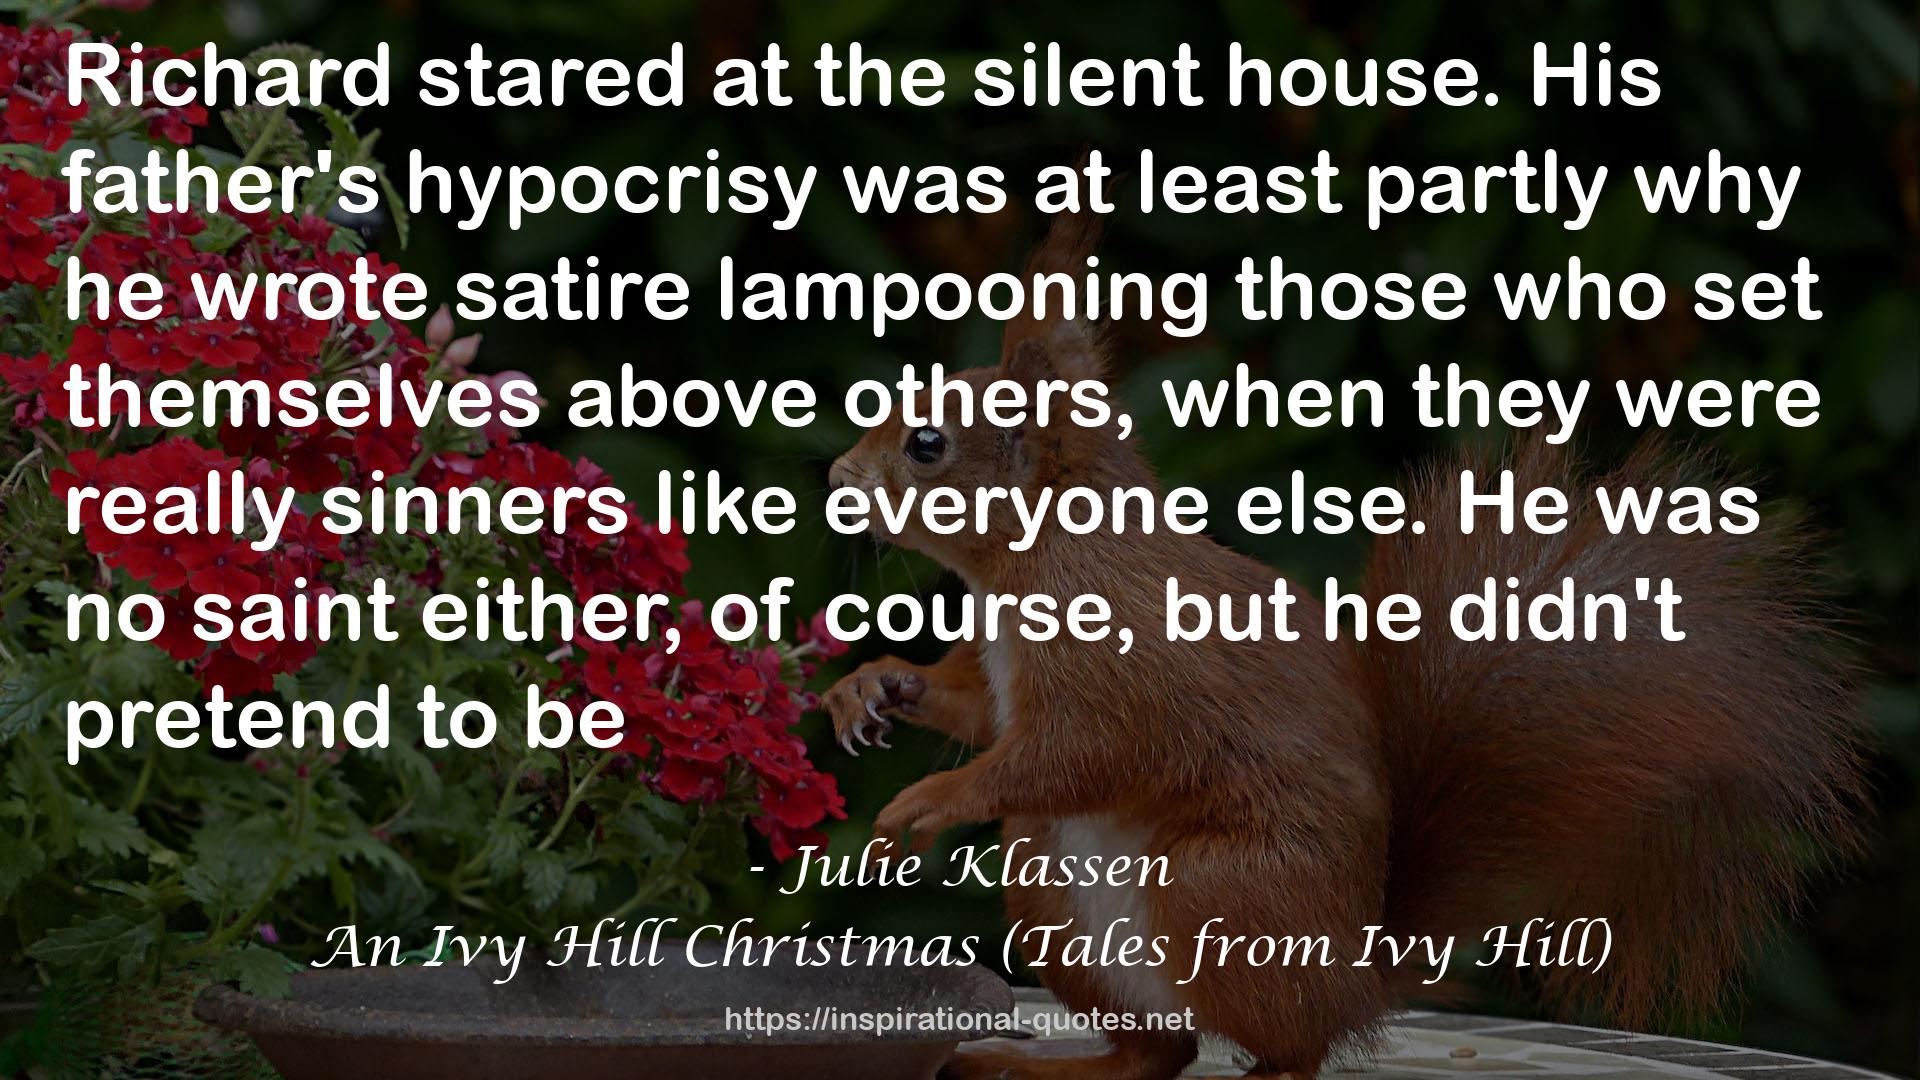 An Ivy Hill Christmas (Tales from Ivy Hill) QUOTES